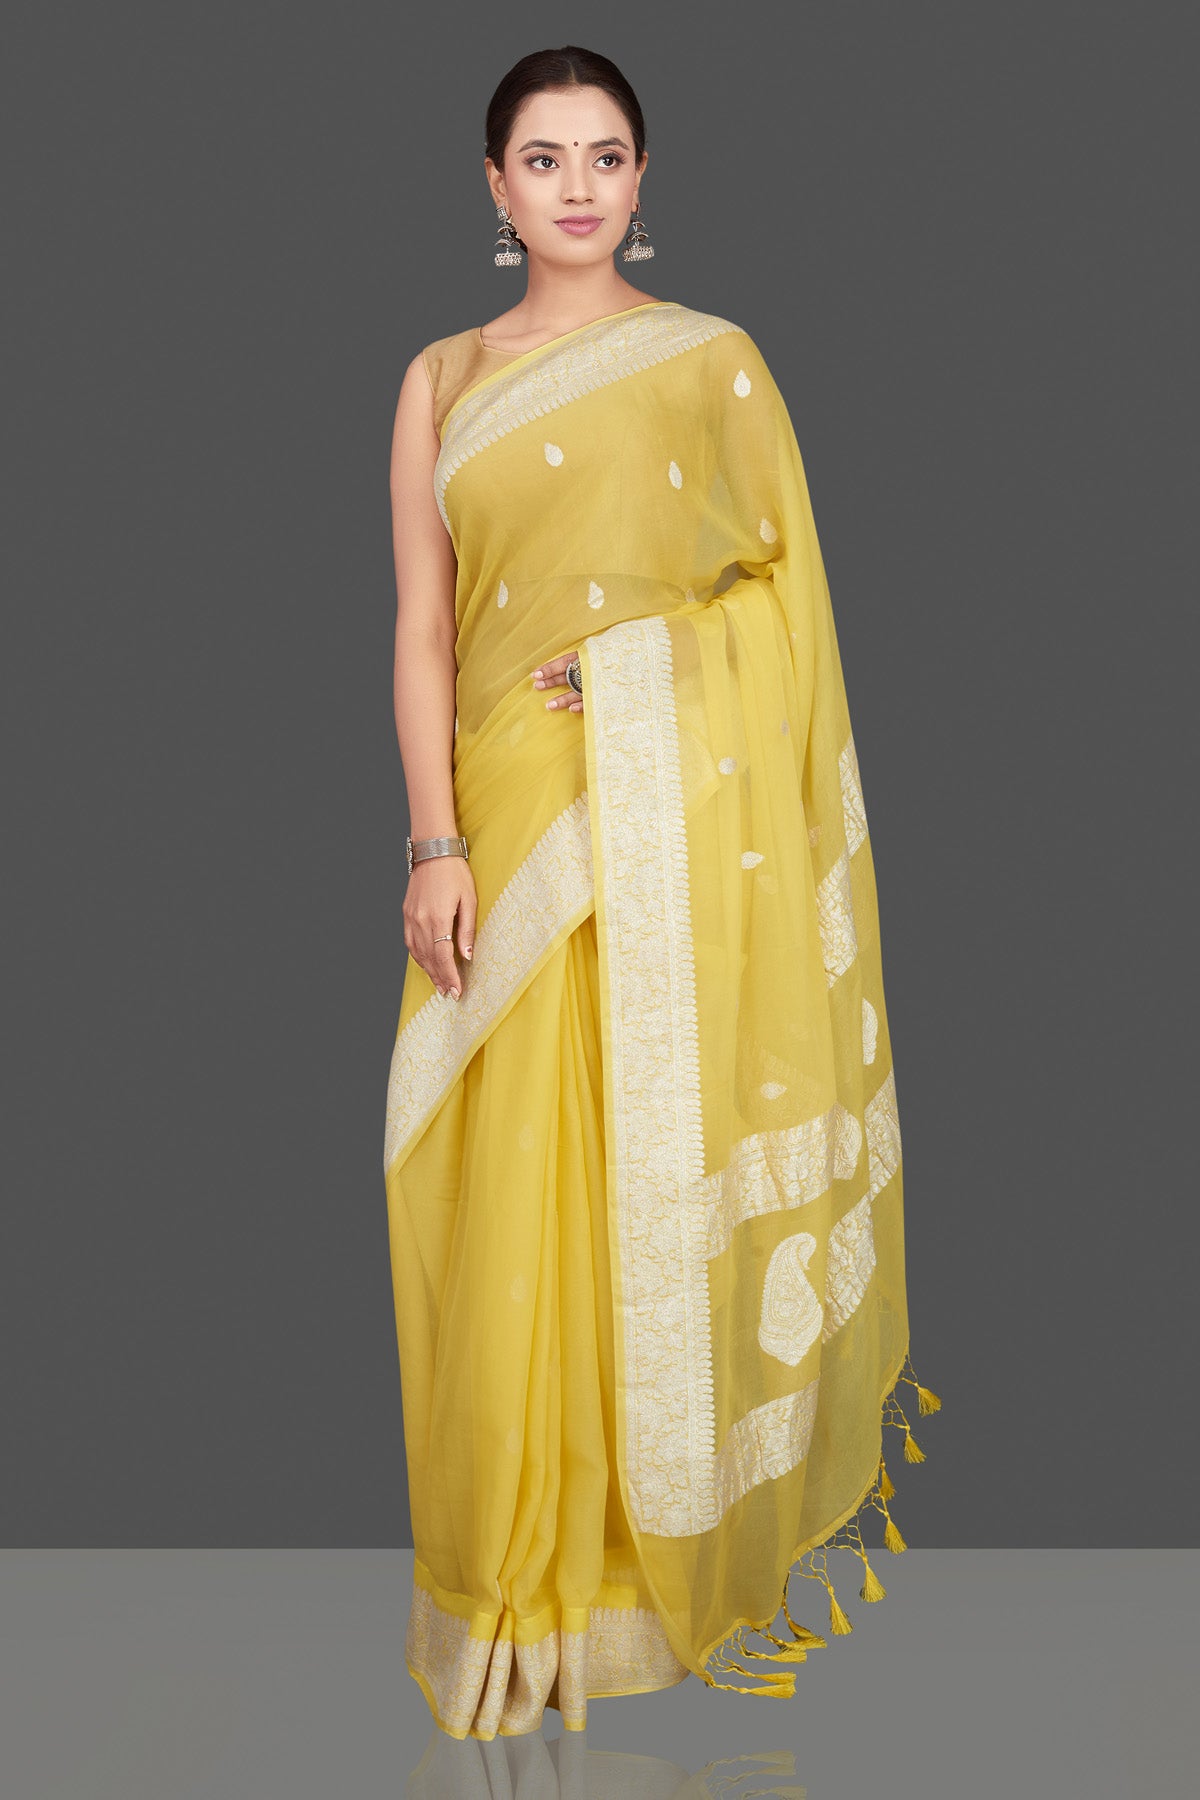 Shop charming yellow color chiffon georgette saree online in USA with silver zari border. Go for stunning Indian designer sarees, georgette sarees, handwoven saris, embroidered sarees for festive occasions and weddings from Pure Elegance Indian clothing store in USA.-full view